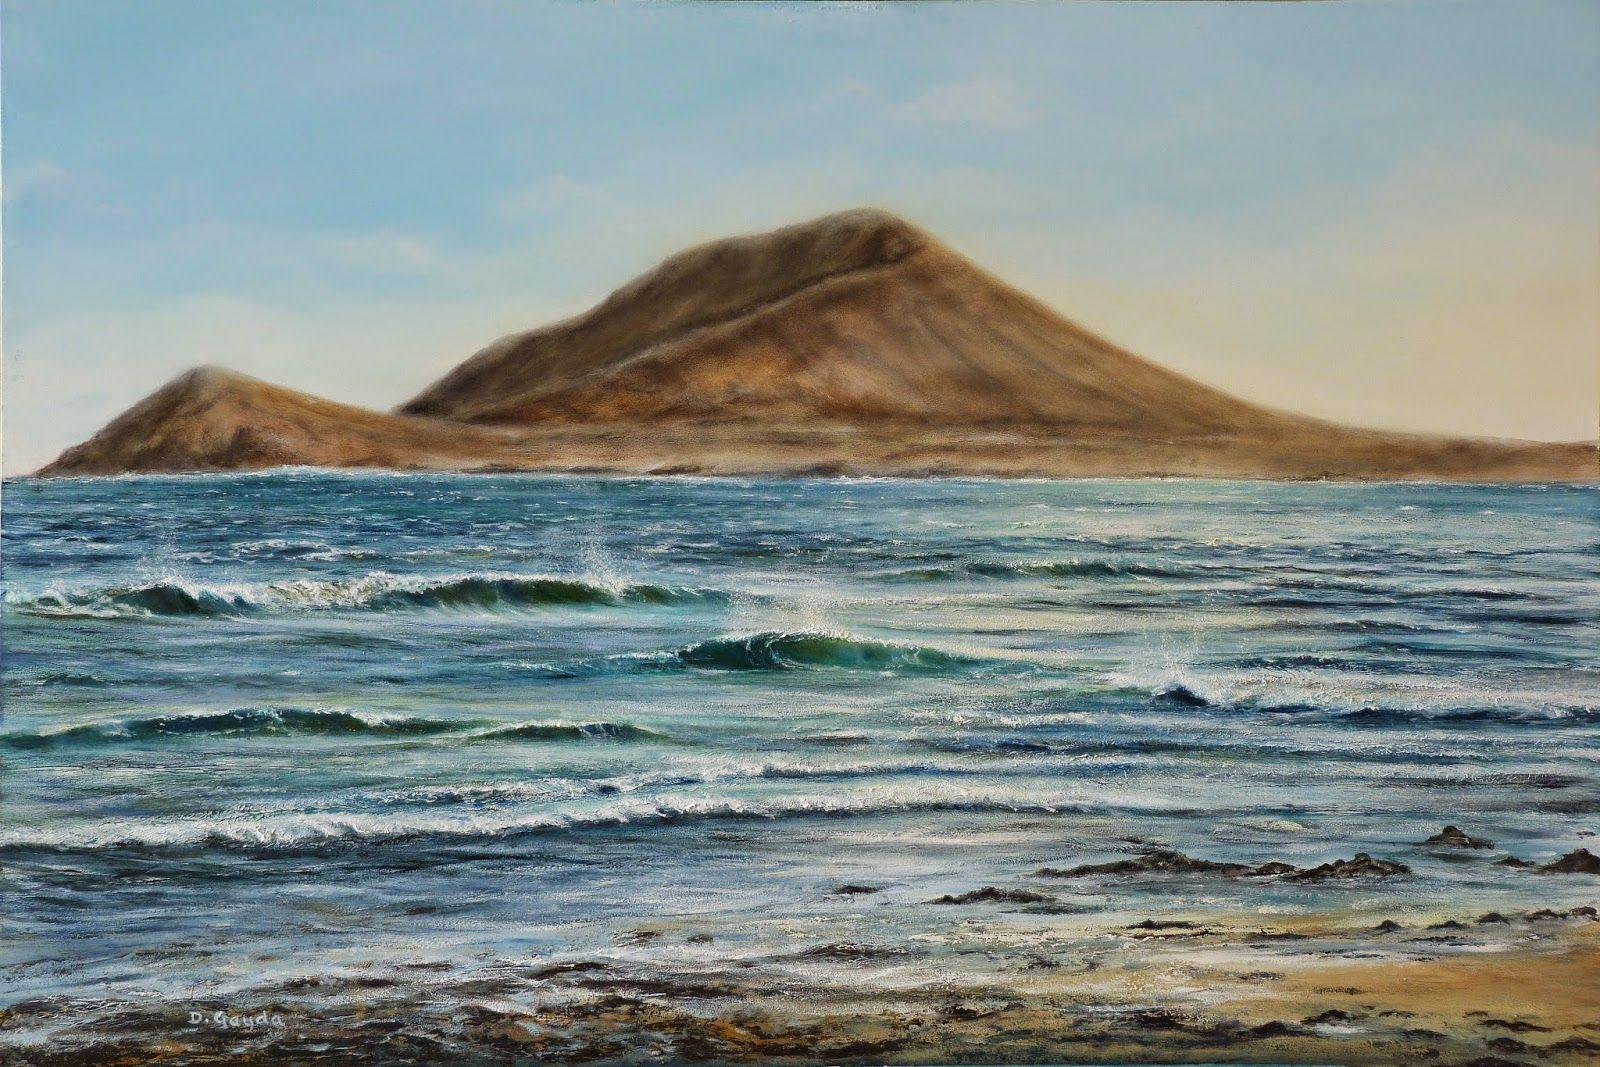 Wave and Red Mountain Logo - David Gayda marine, Seascape and wave painting artist: Red mountain